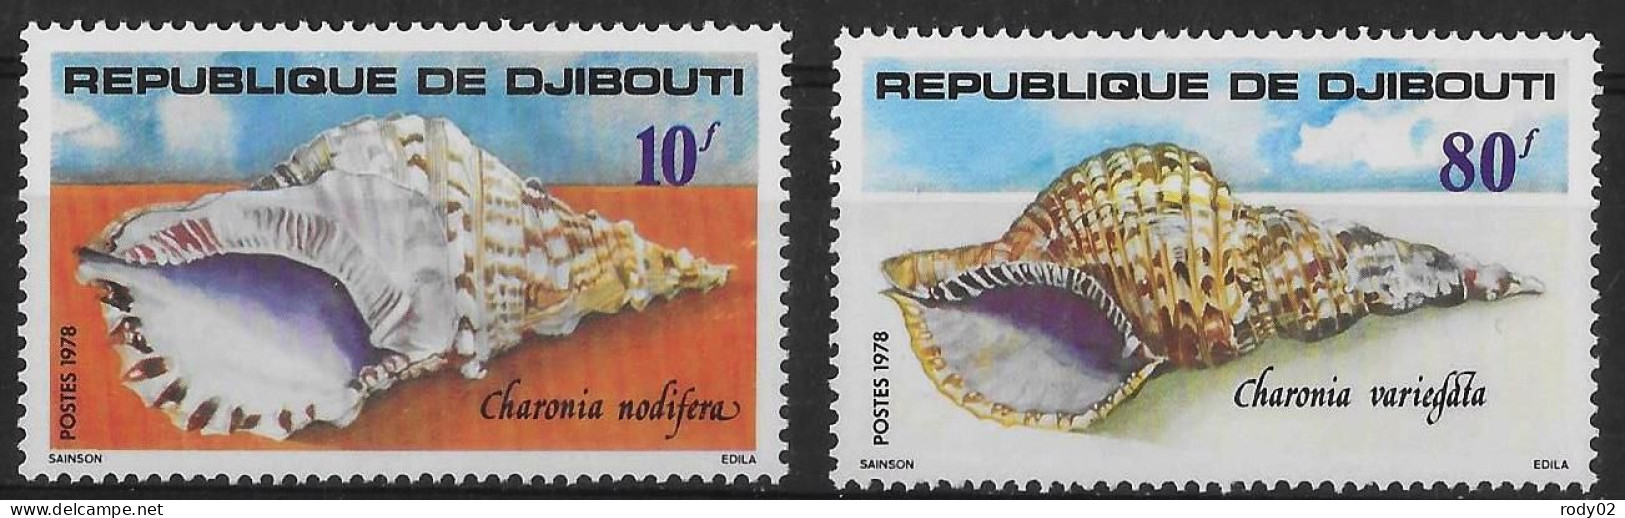 DJIBOUTI - COQUILLAGES - N° 486 ET 487 - NEUF** MNH - Coquillages